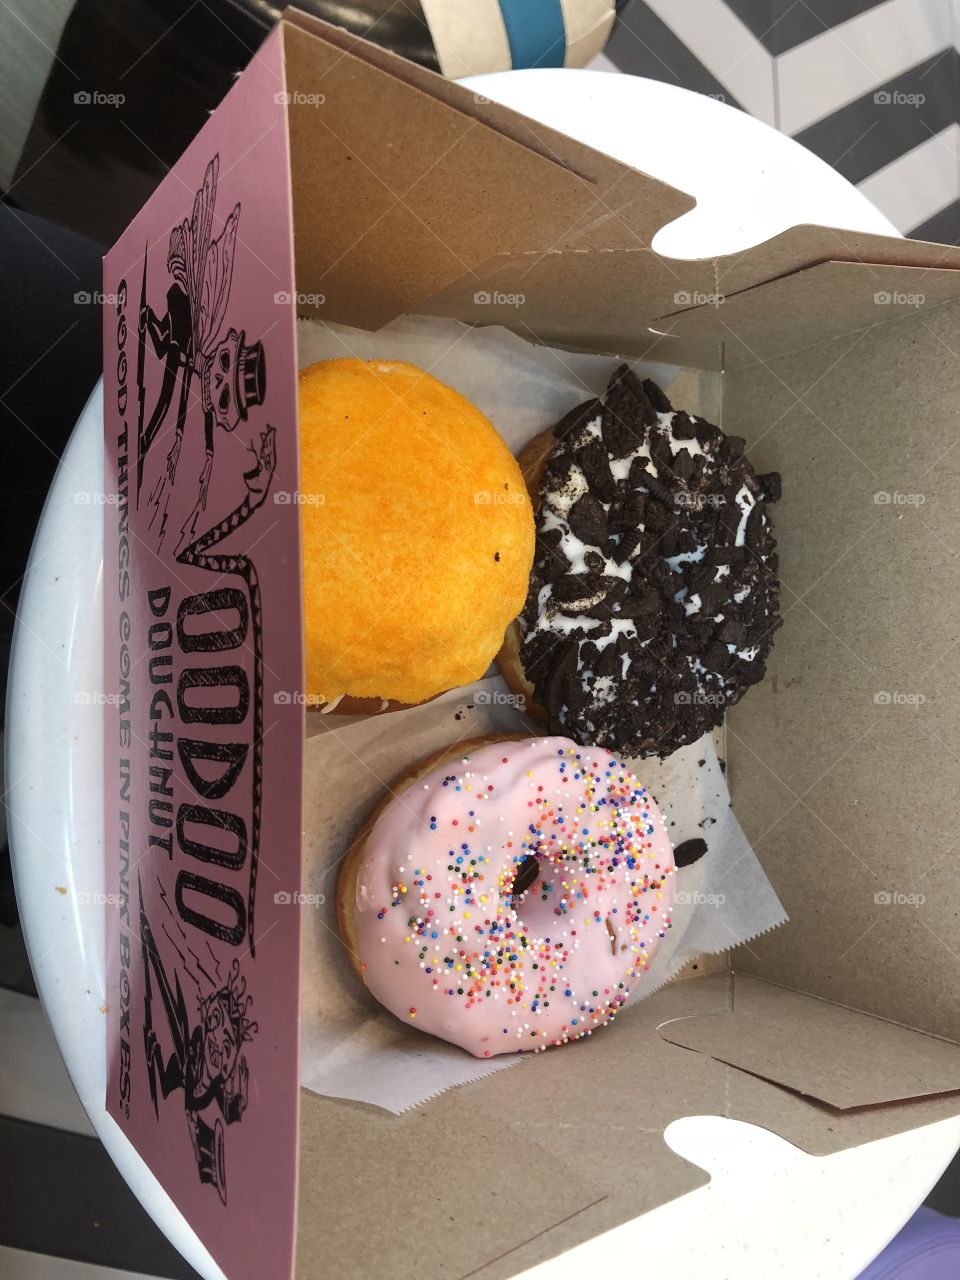 Sweet, tasty, delicious, mouth watering and colorful Vodoo Donuts from Universal City Walk in Orlando! 